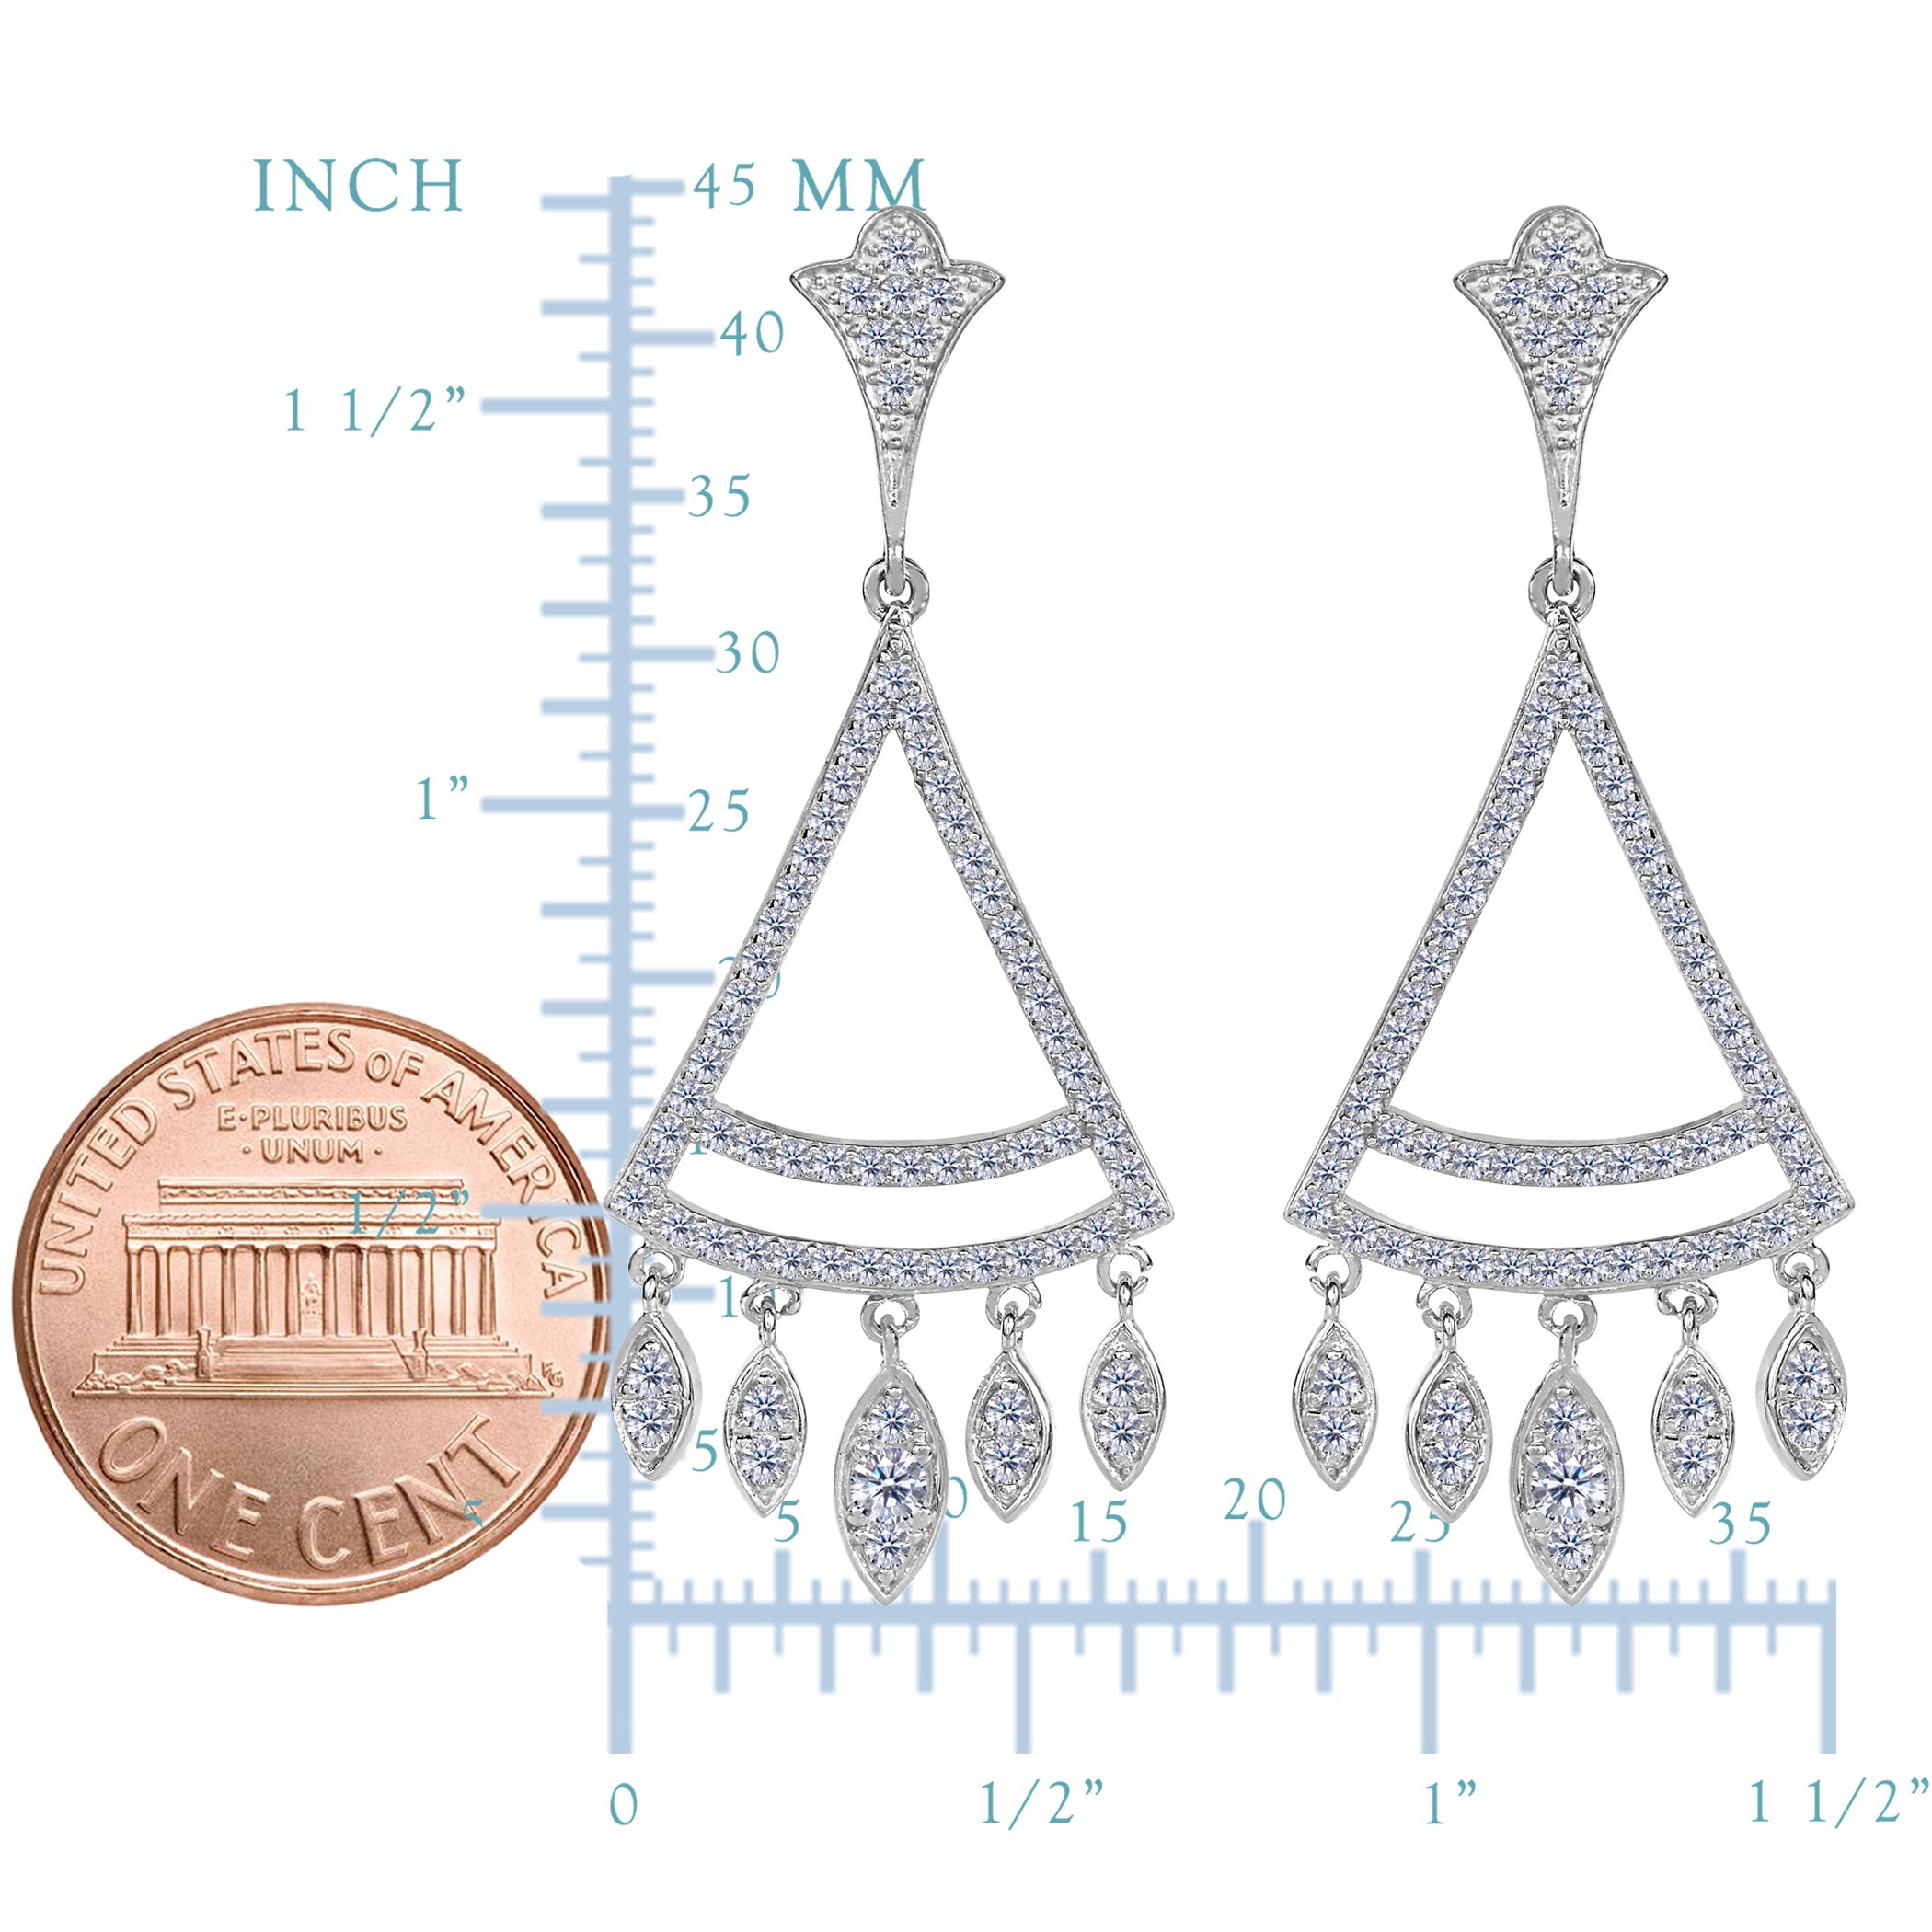 Sterling Silver And Cubic Zirconia Triangle Shaped Chandelier Earrings